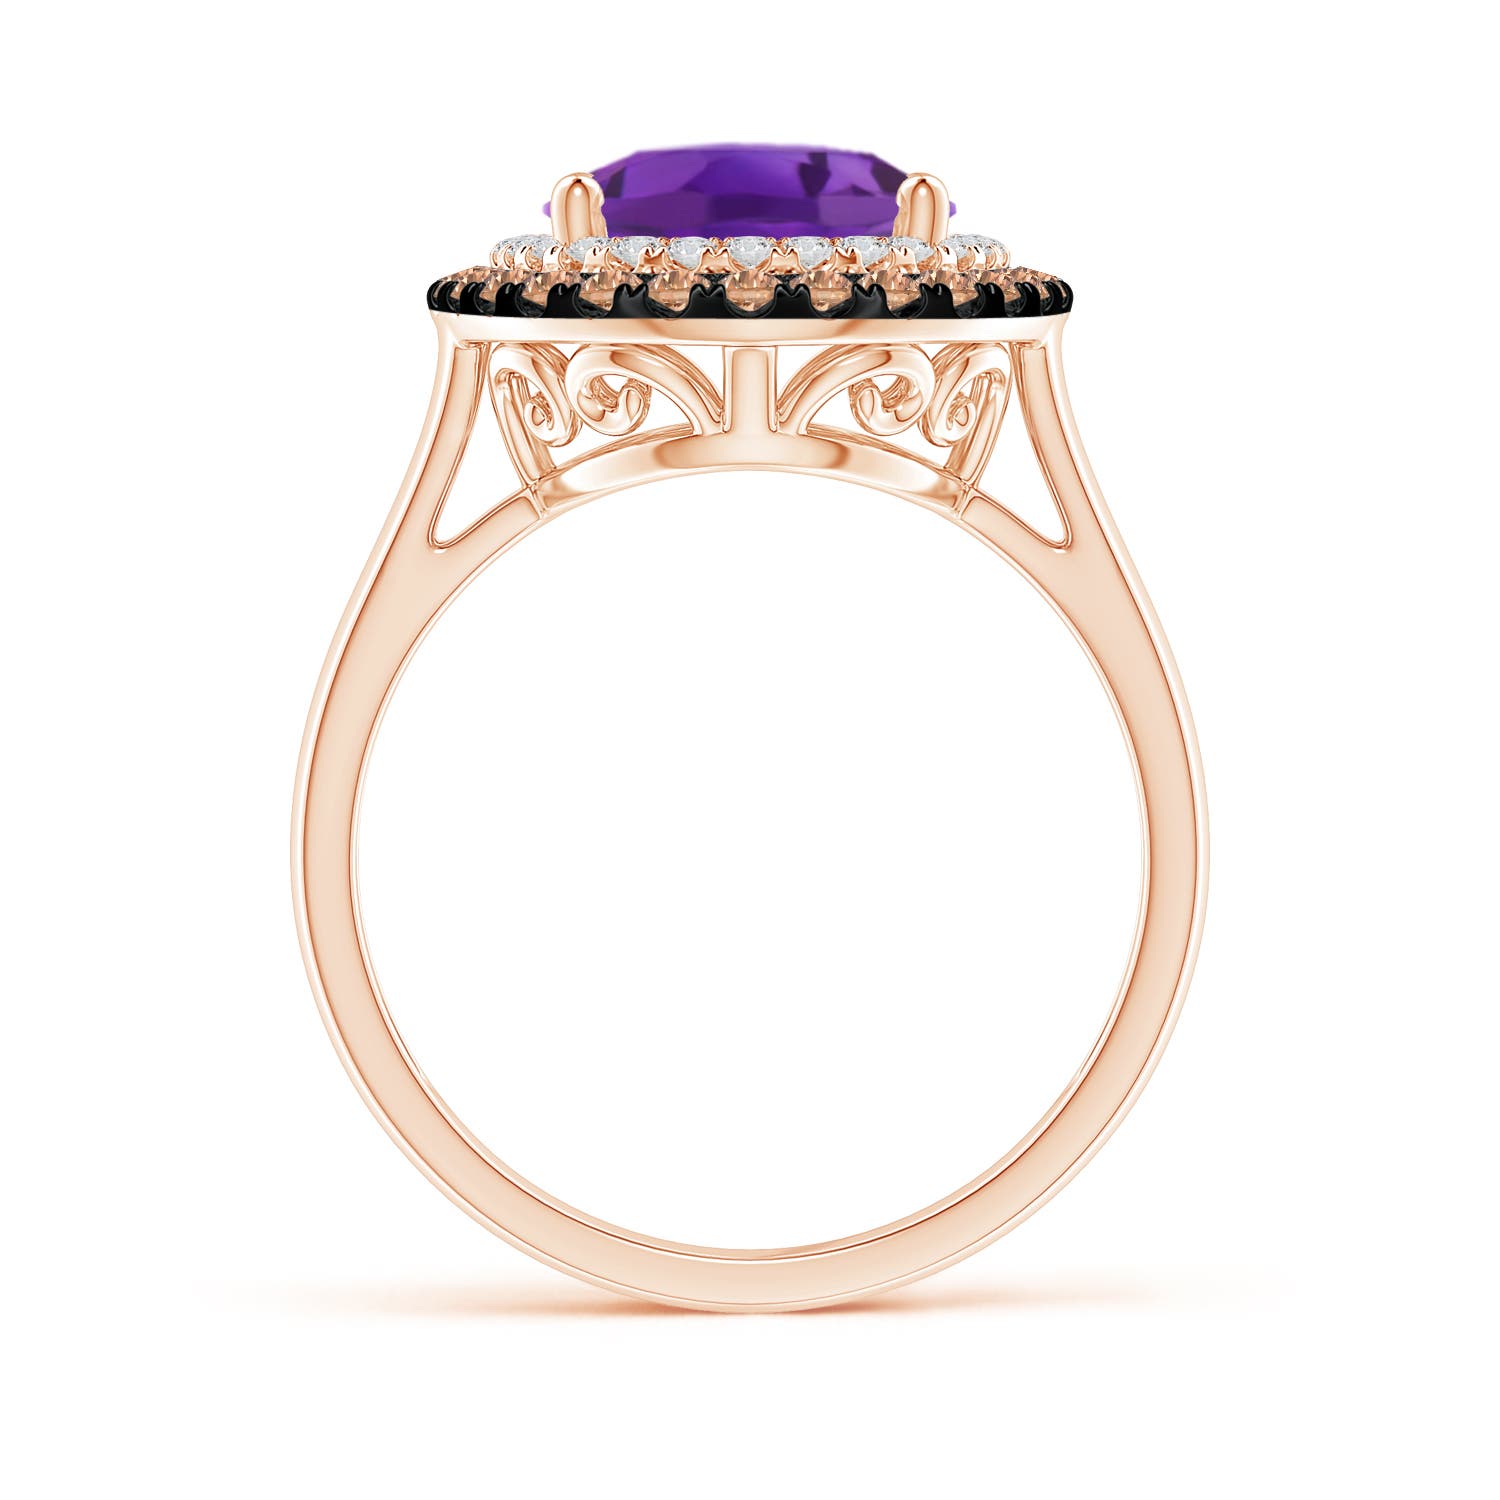 AAA - Amethyst / 3.71 CT / 14 KT Rose Gold